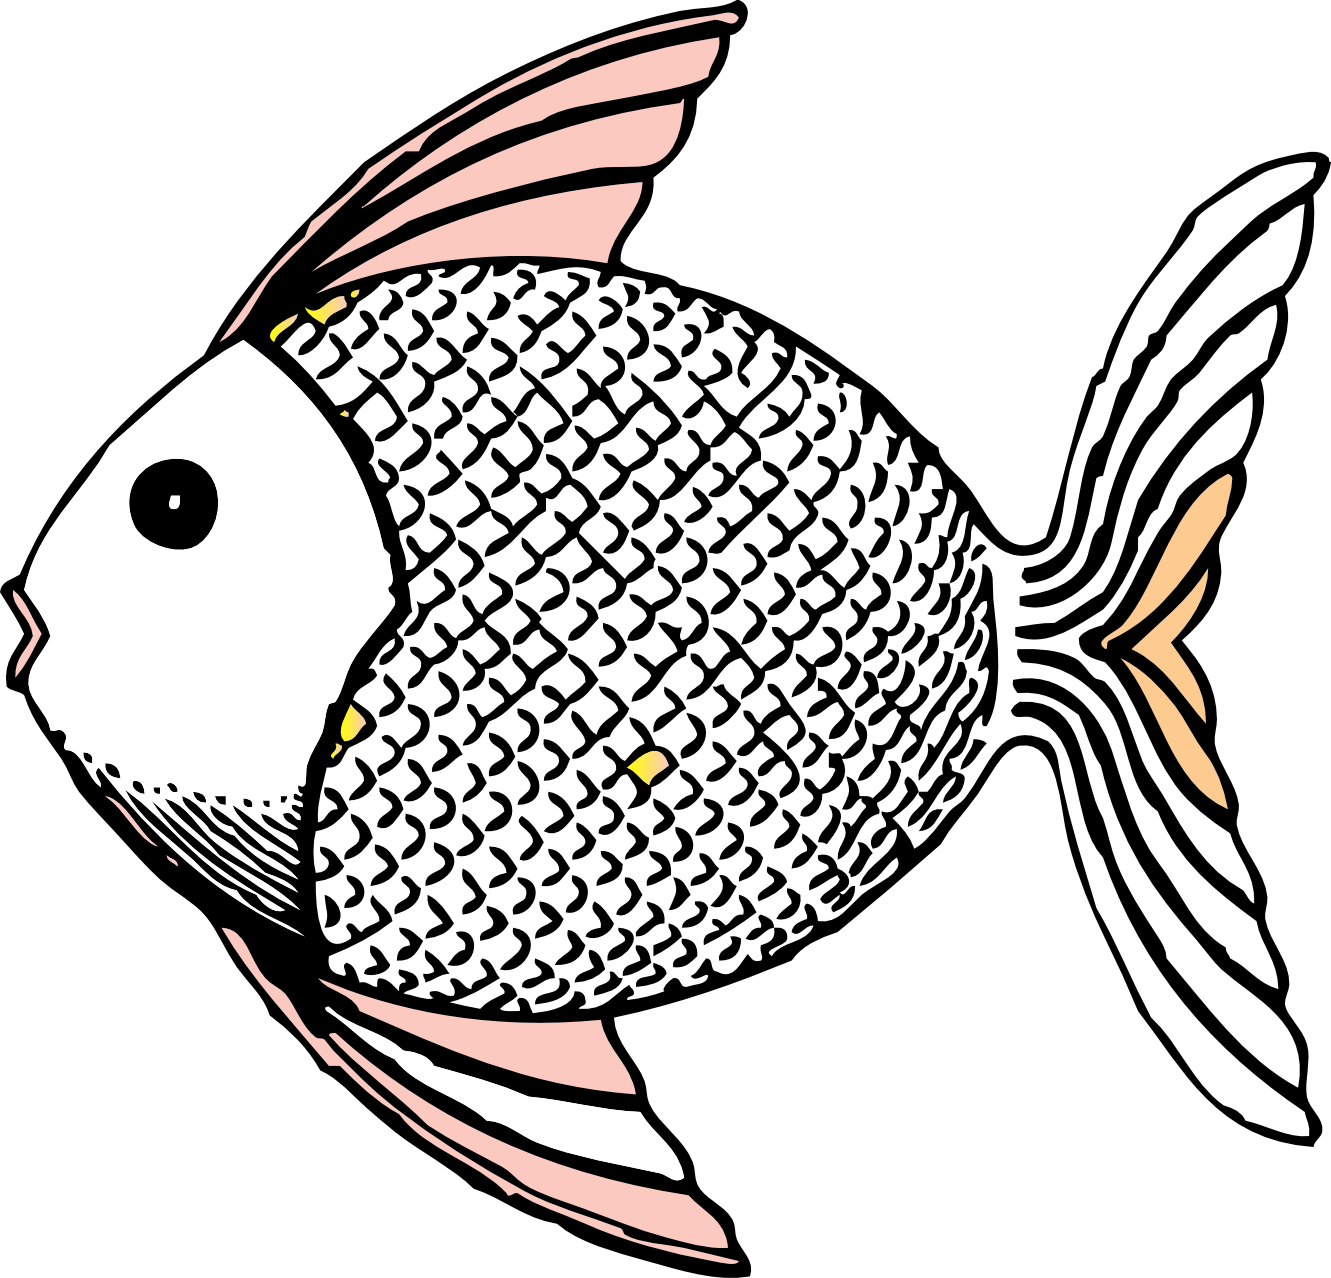 Fish Clip Art Black And White | Clipart Panda - Free Clipart Images